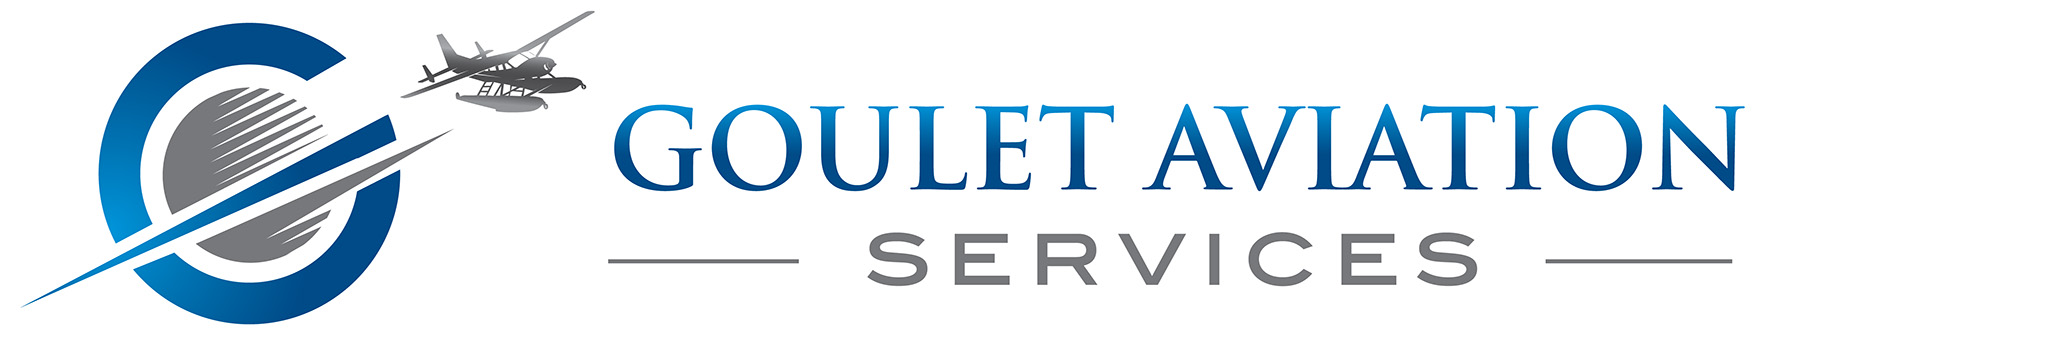 Goulet Aviation Services